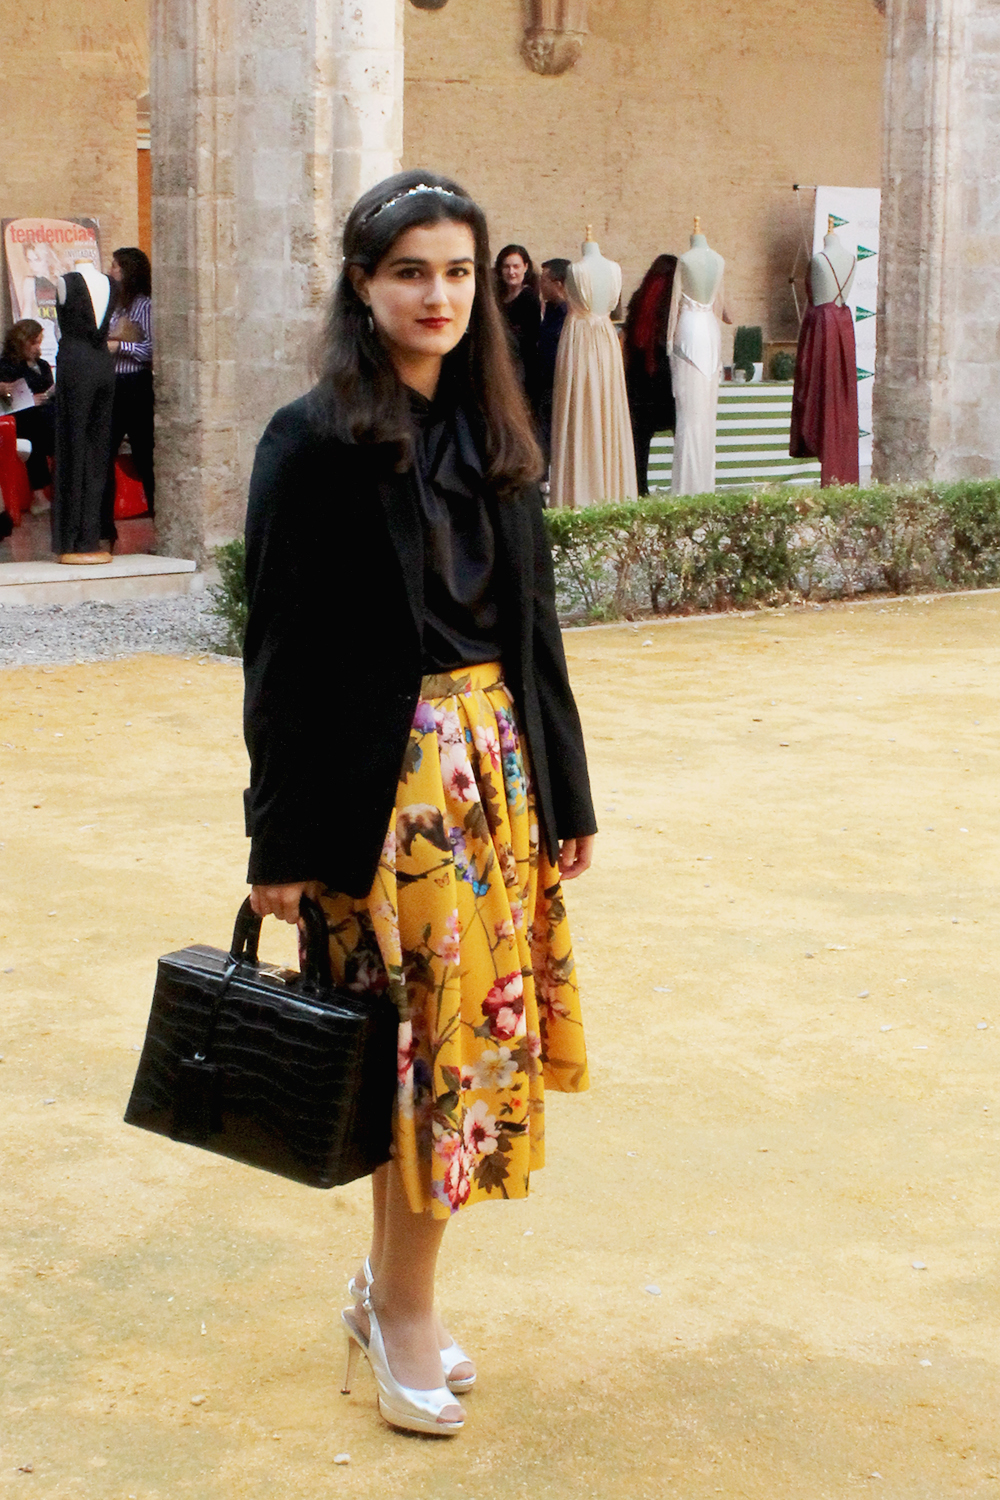 something fashion valencia fashion week VFW outfit D&G 50's inspired skirt, Dolce Gabanna circle skirt vintage fairytale yellow floral pattern